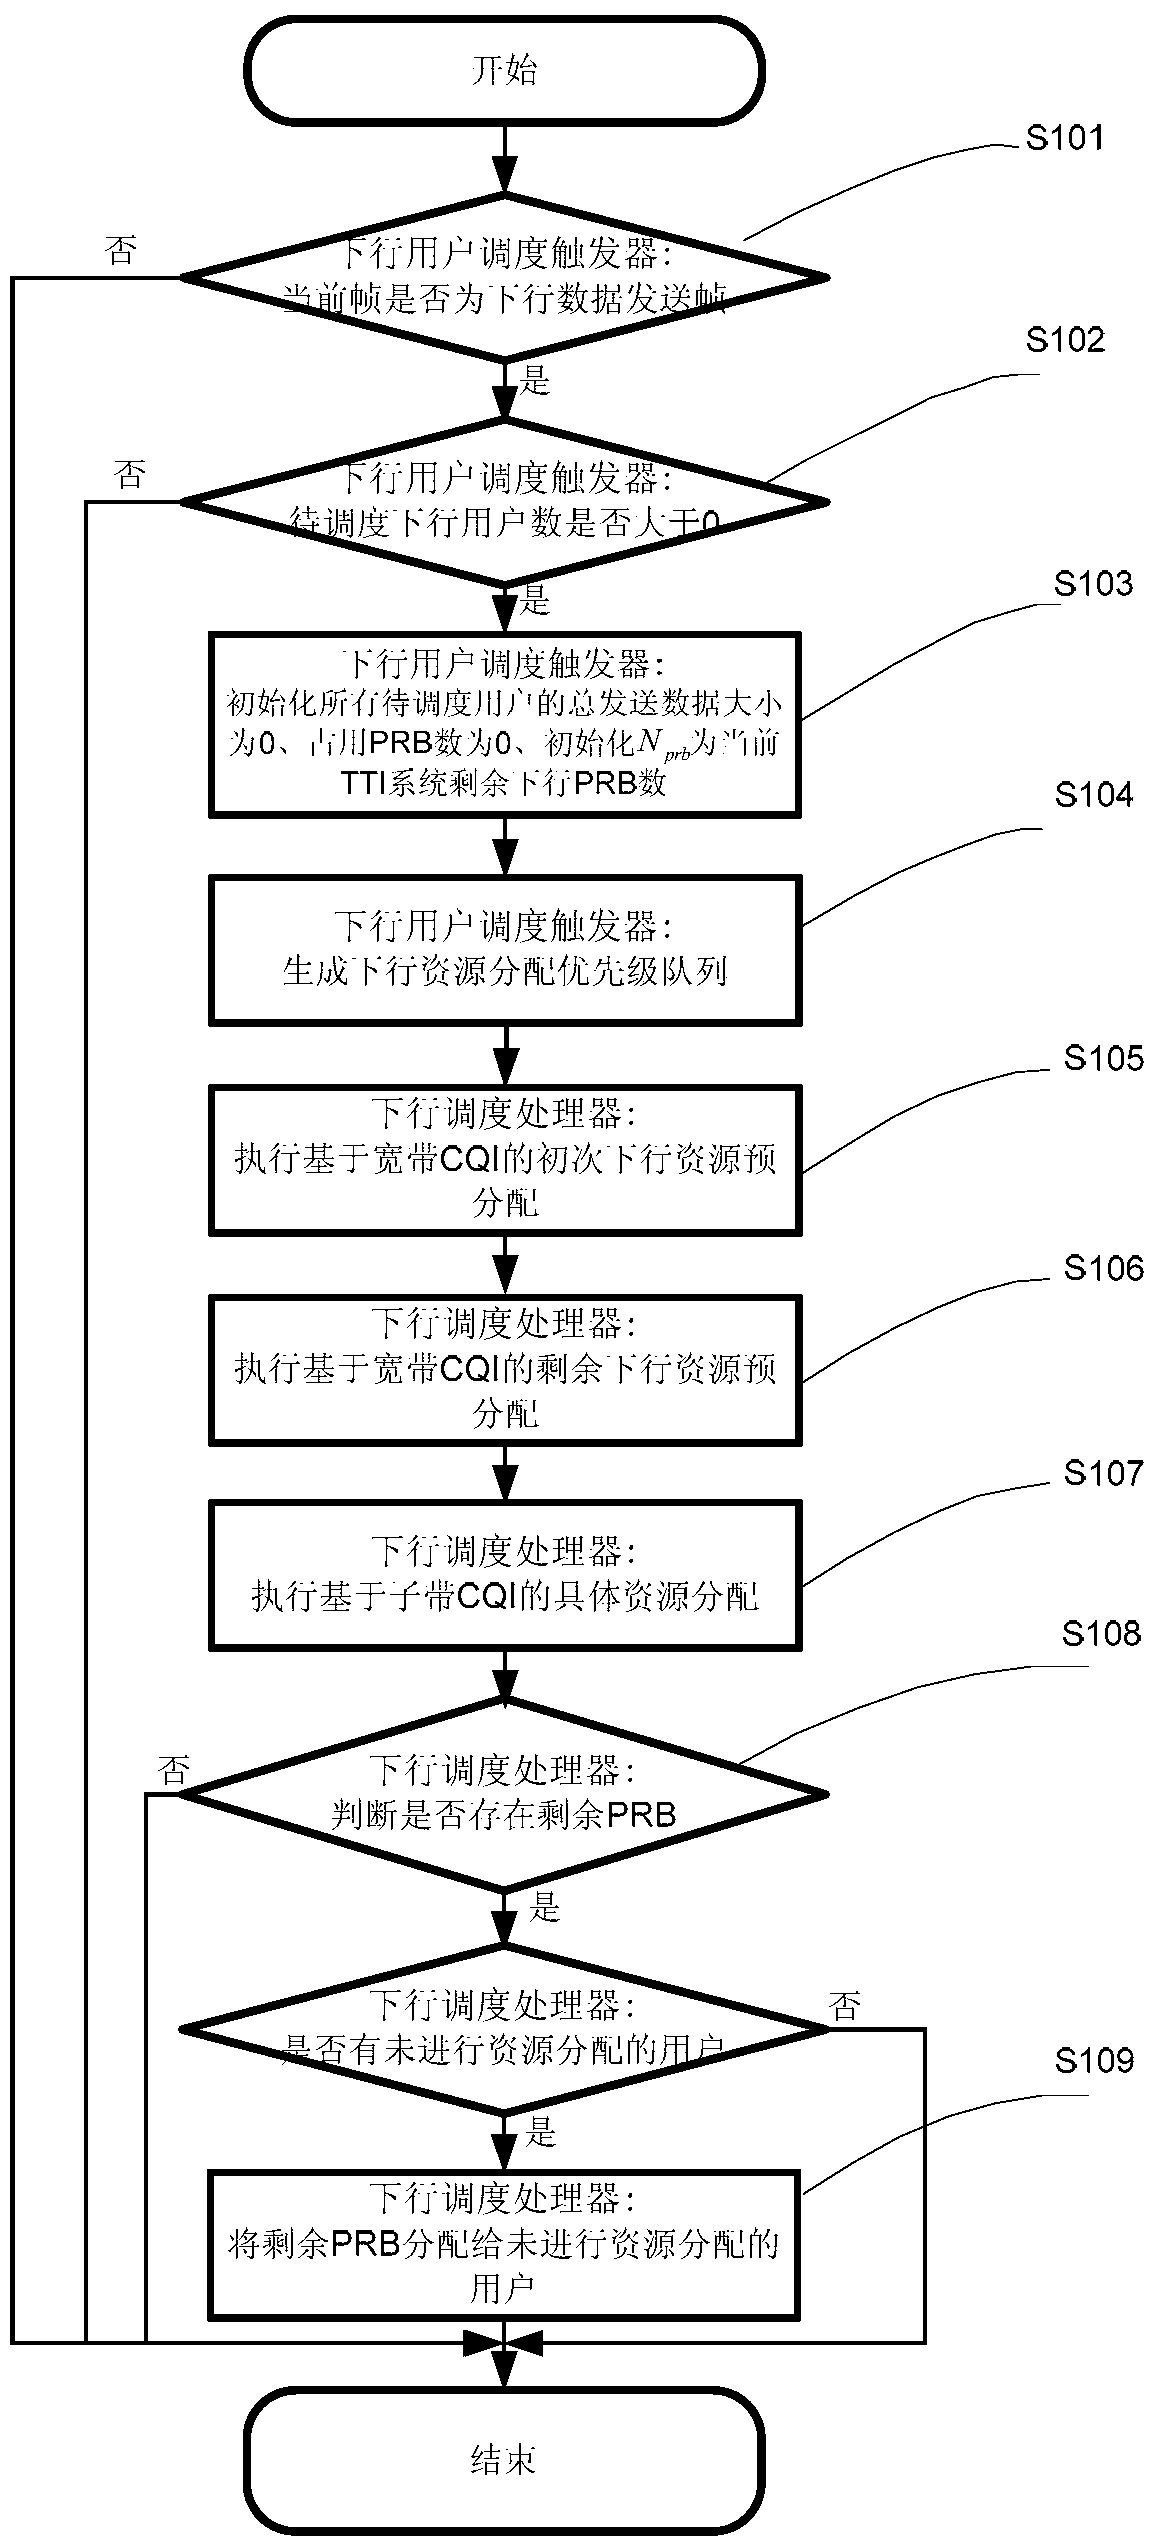 LTE system base station equipment downlink resource allocation method and device